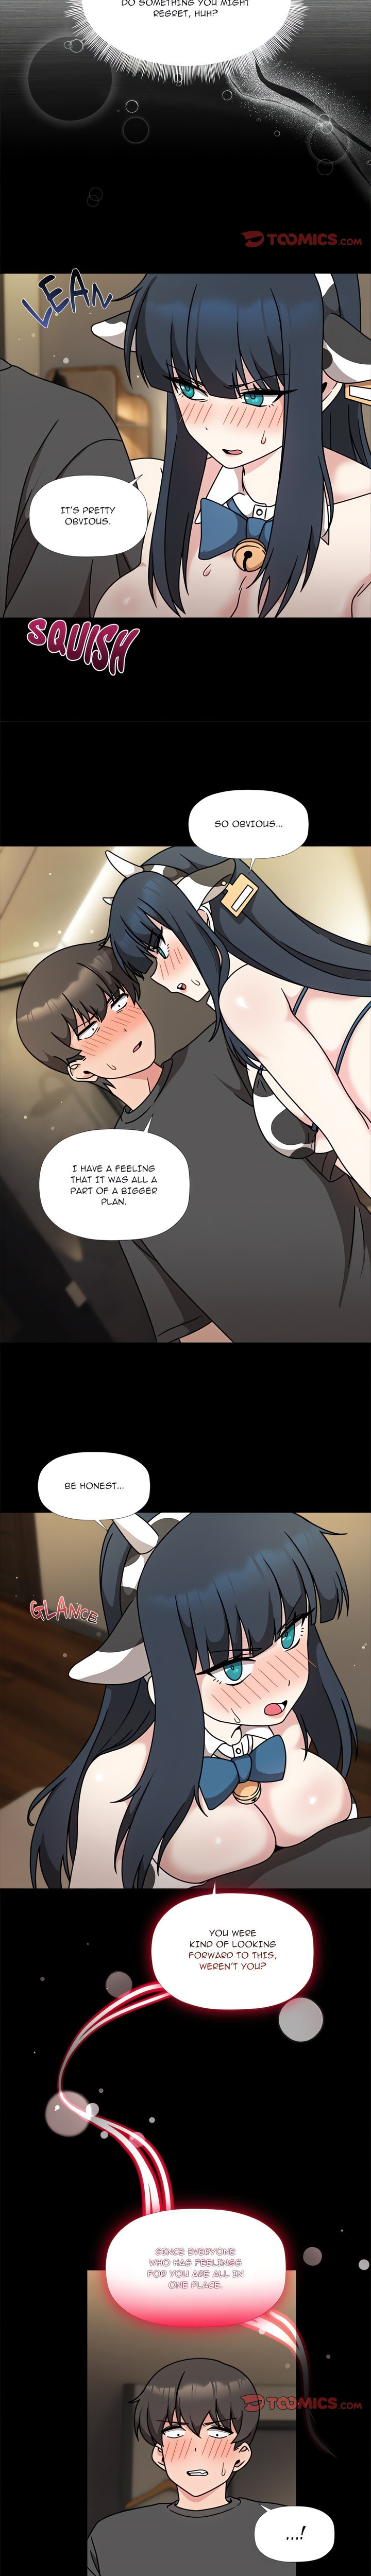 #Follow Me - Chapter 50 Page 2